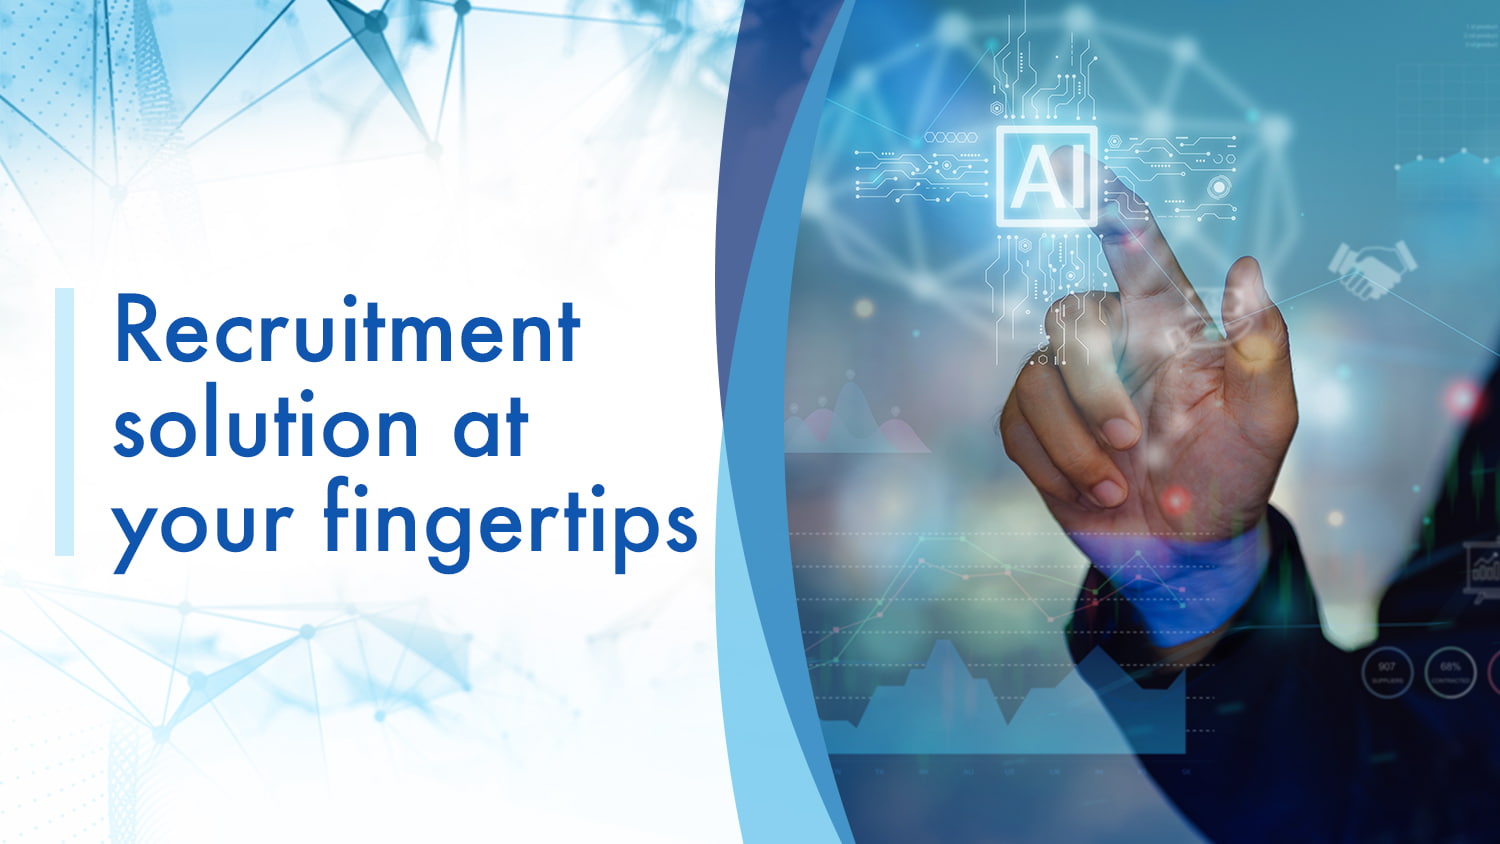 Recruitment solution at your fingertips